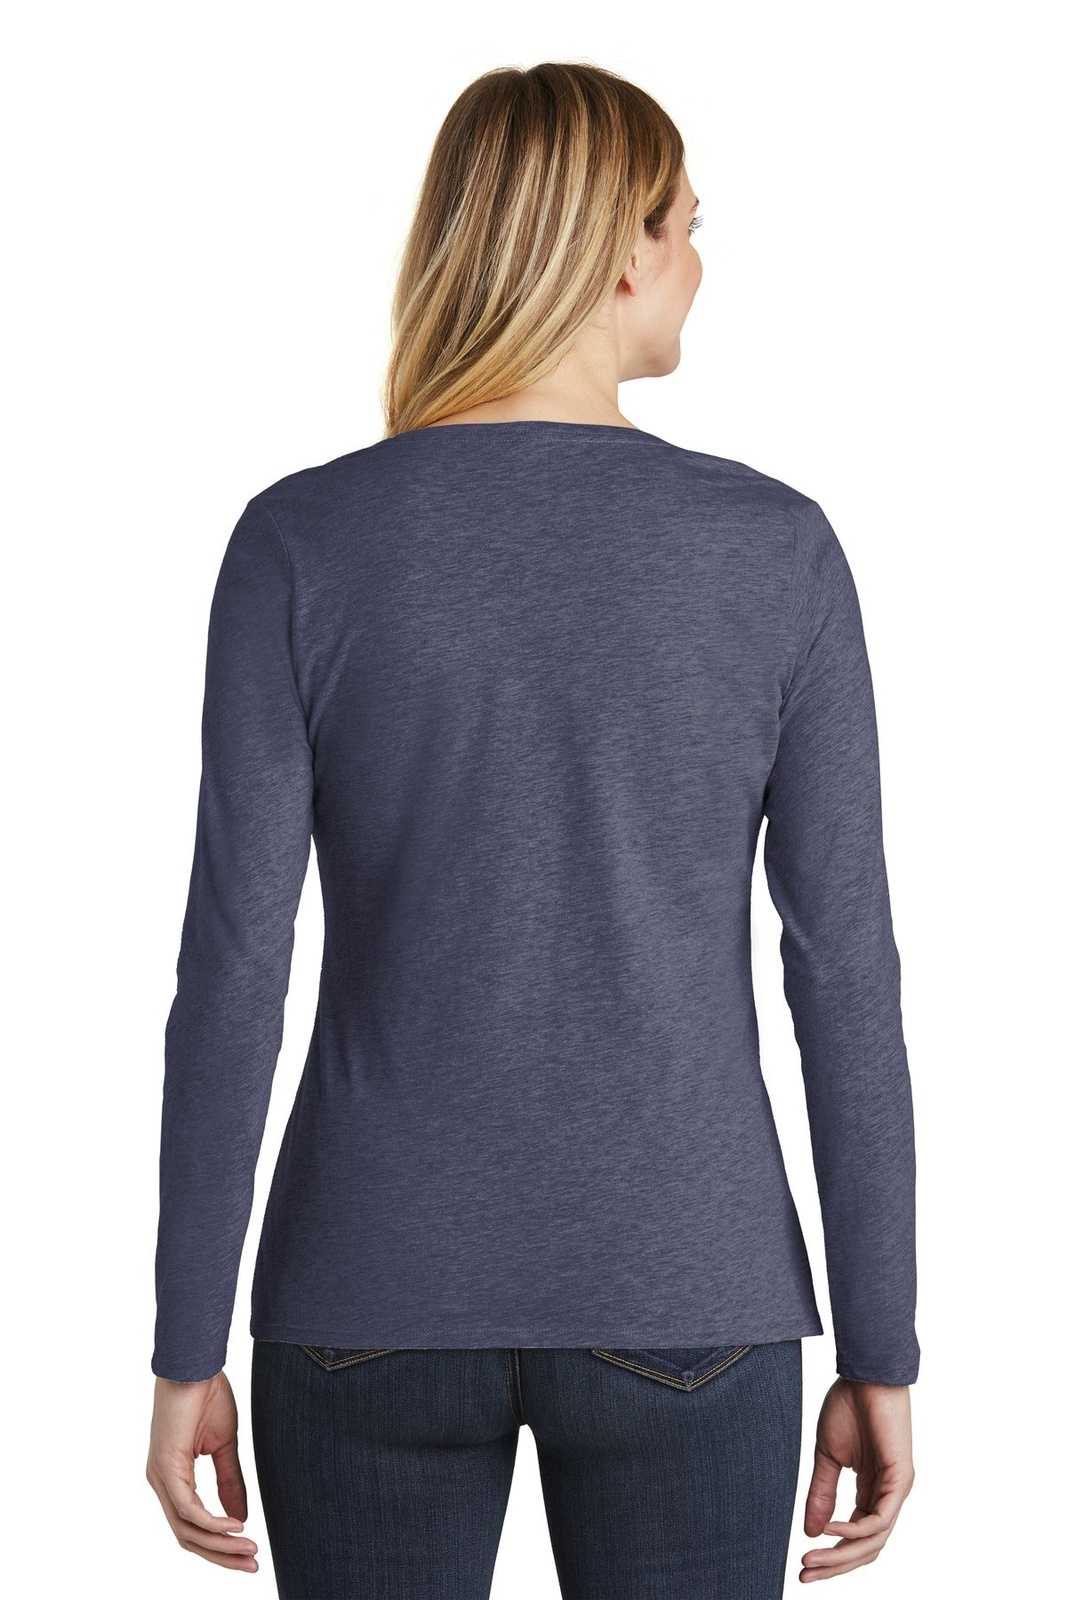 District DT6201 Women's Very Important Tee Long Sleeve V-Neck - Heathered Navy - HIT a Double - 1